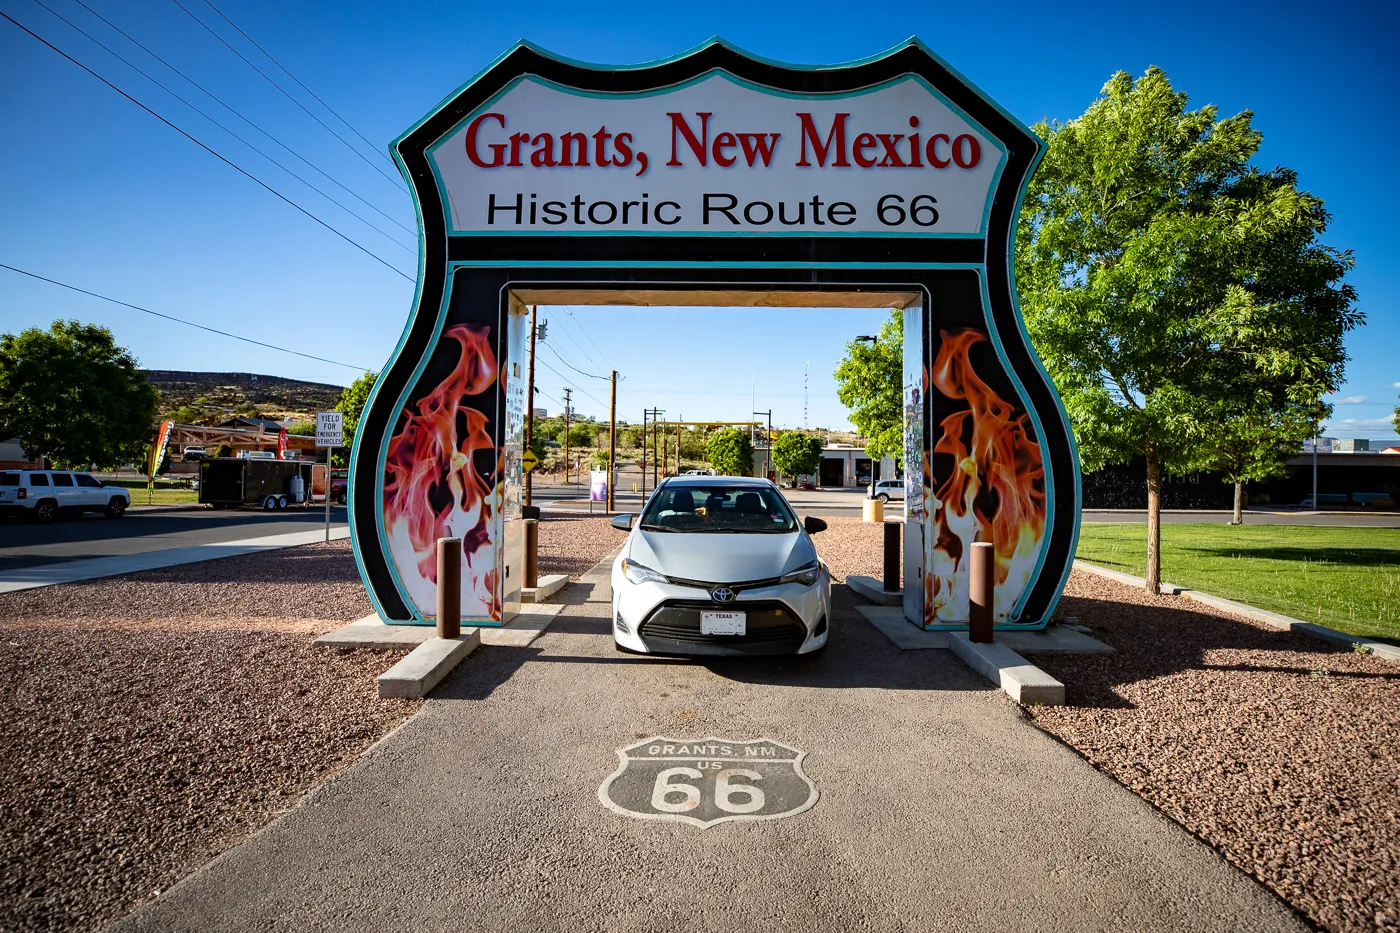 Route 66 Neon Drive-Thru Sign in Grants, New Mexico